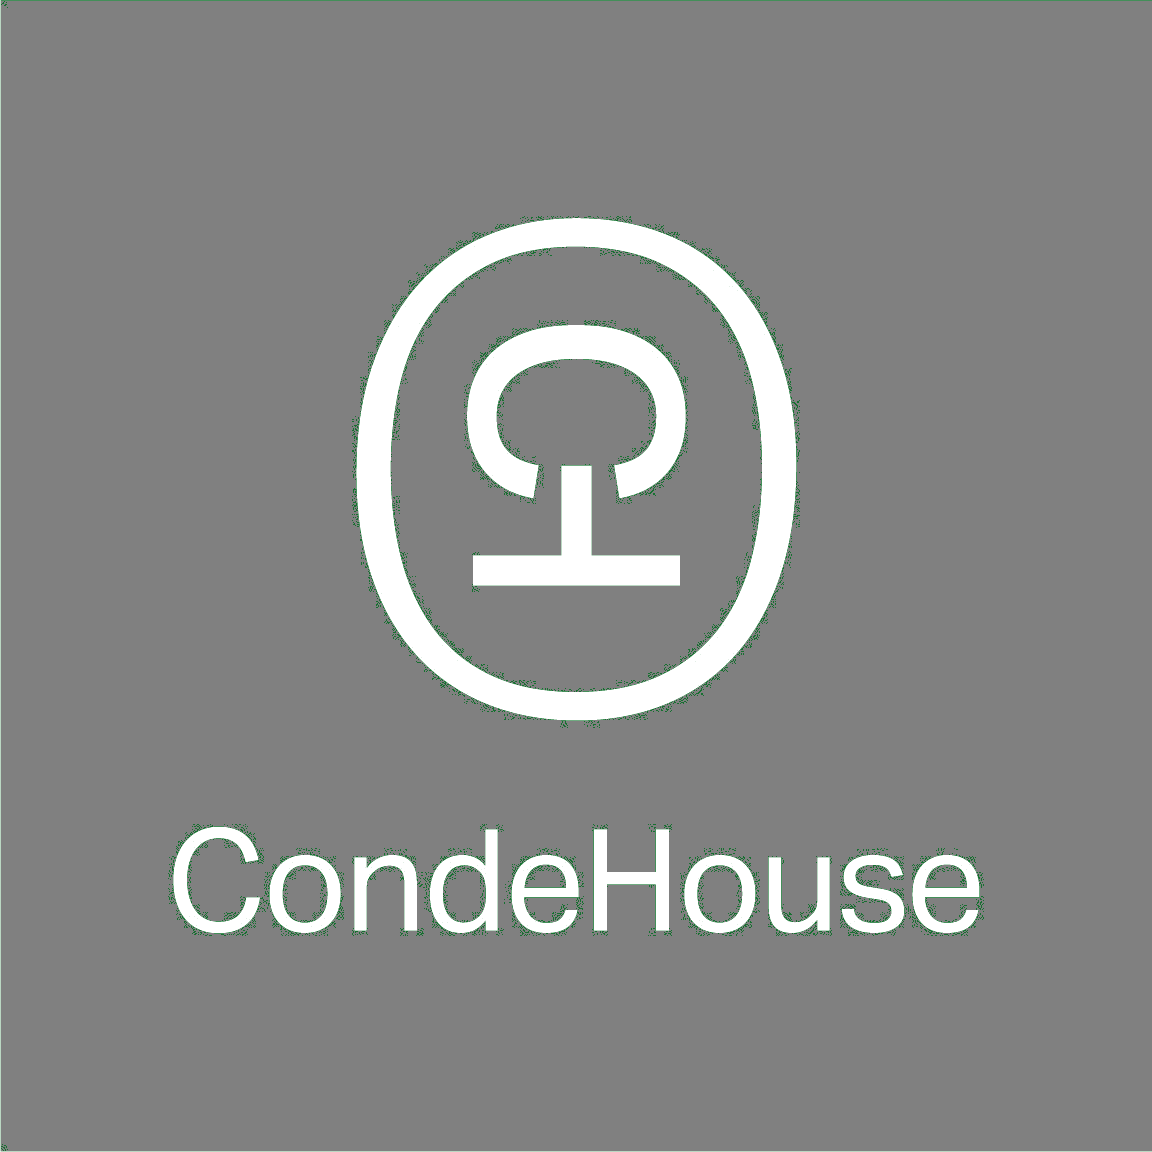  https://www.condehouse.com/